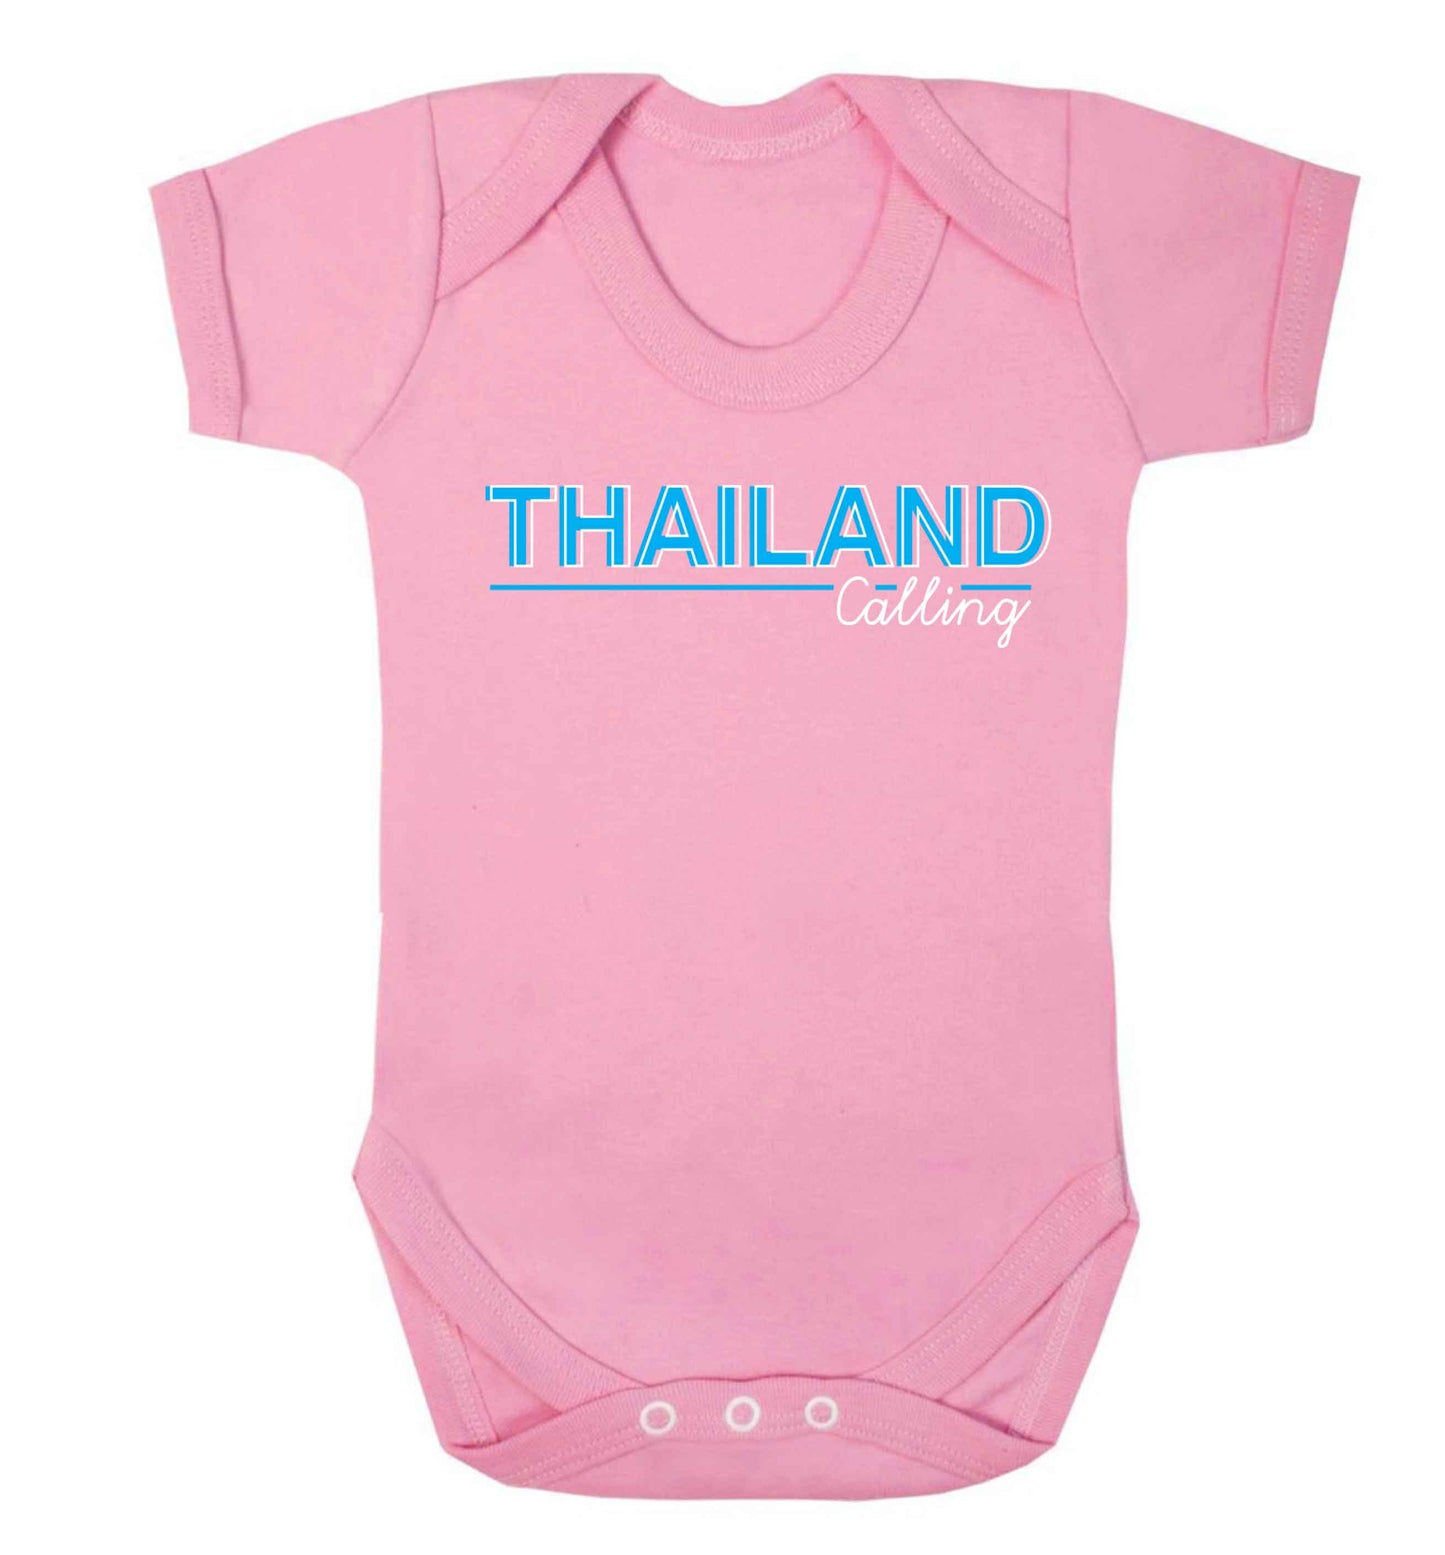 Thailand calling Baby Vest pale pink 18-24 months